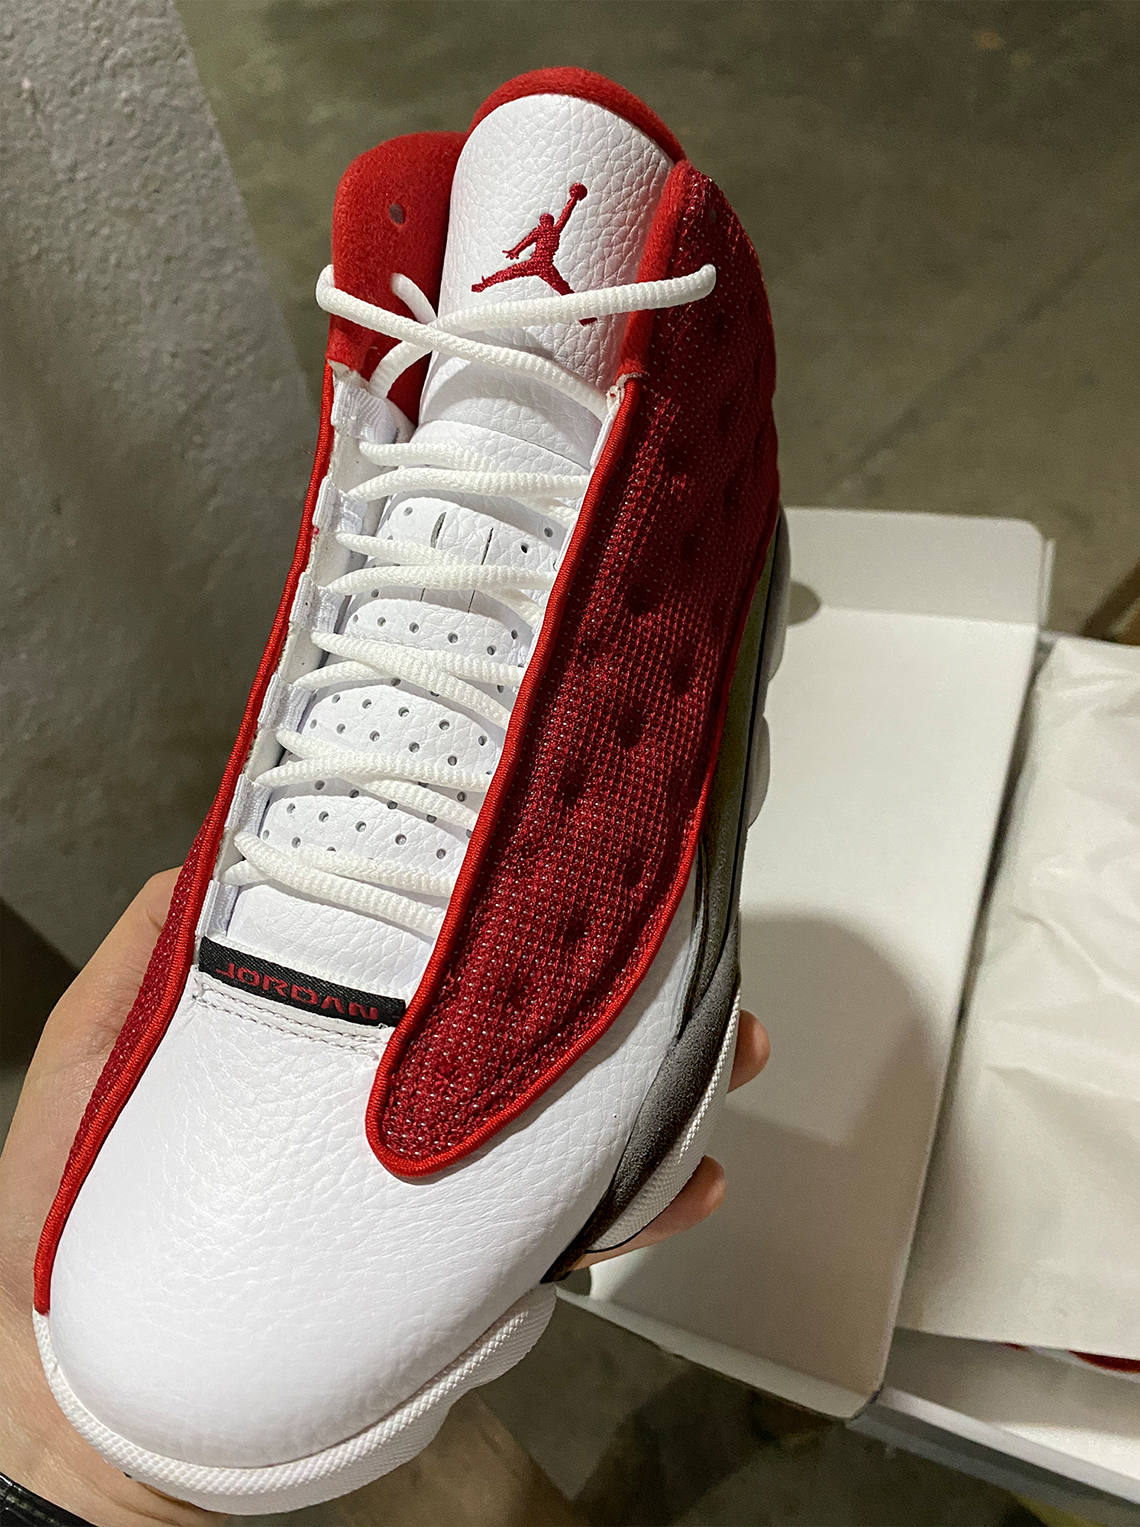 red and white 13s release date